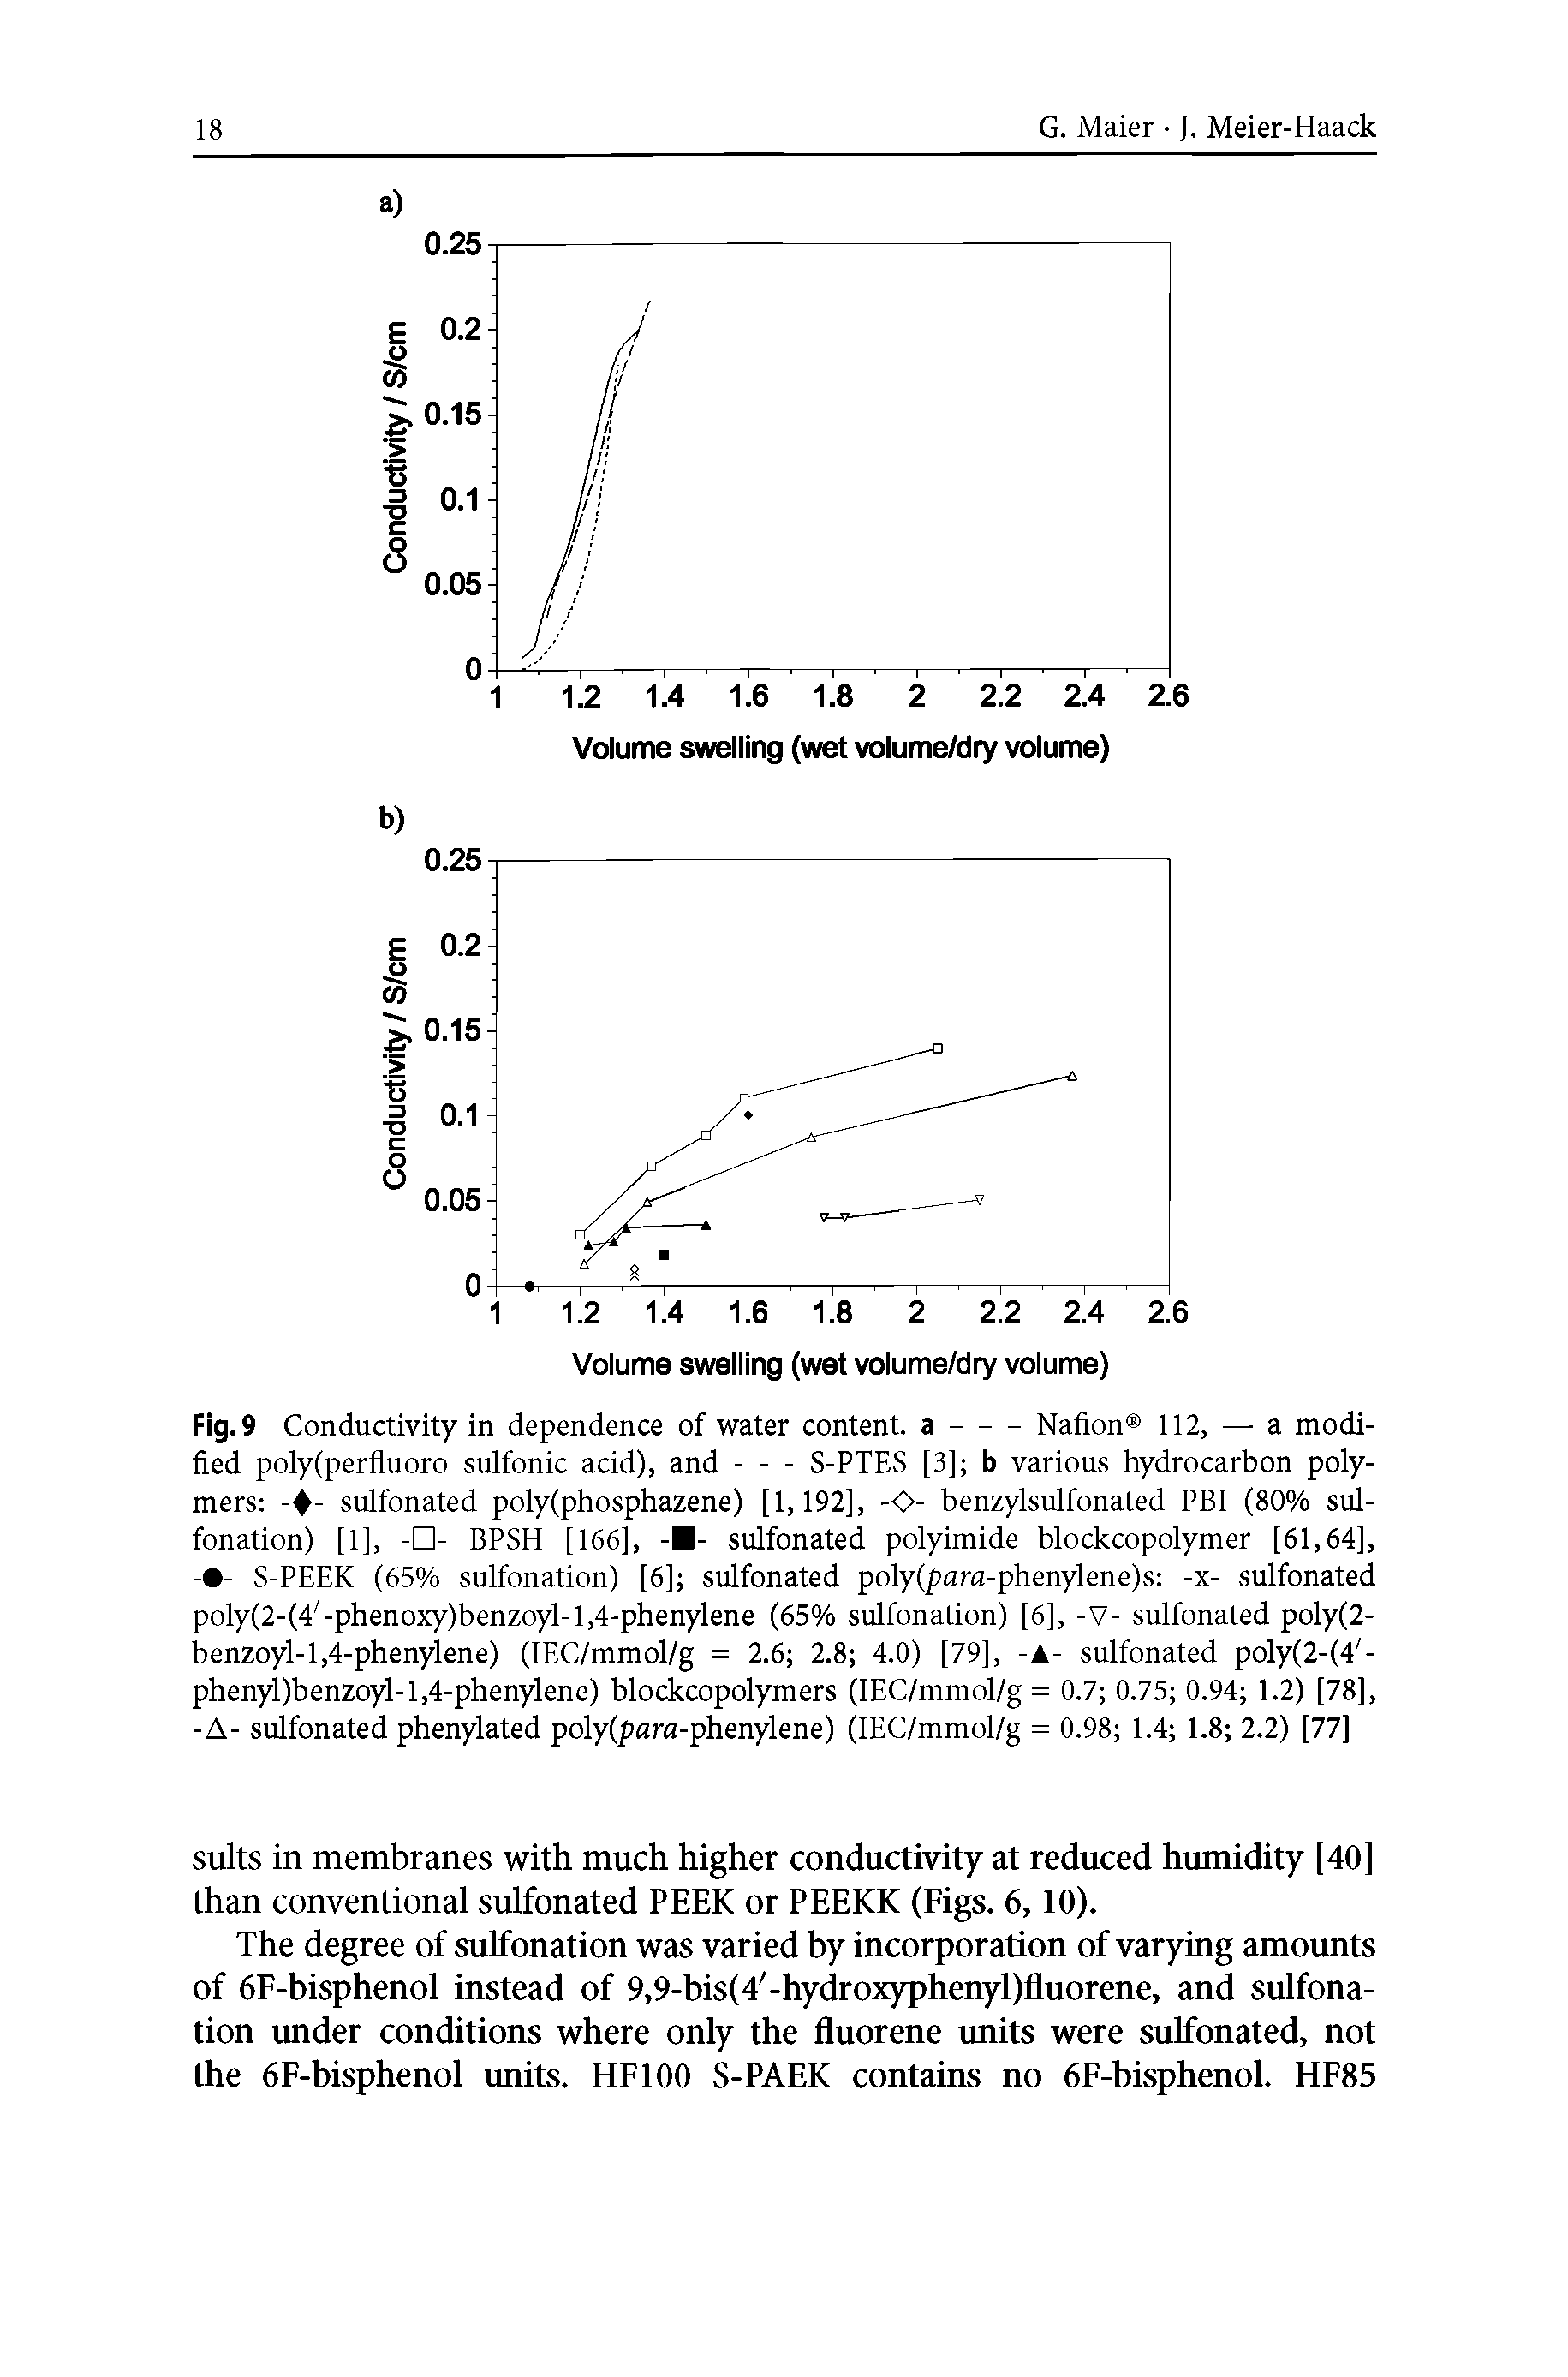 Fig. 9 Conductivity in dependence of water content, a-----Nafion 112, — a modified poly(perfiuoro sulfonic acid), and---S-PTES [3] b various hydrocarbon polymers sulfonated poly(phosphazene) [1,192], -<C>- benzylsulfonated PBI (80% sul-...